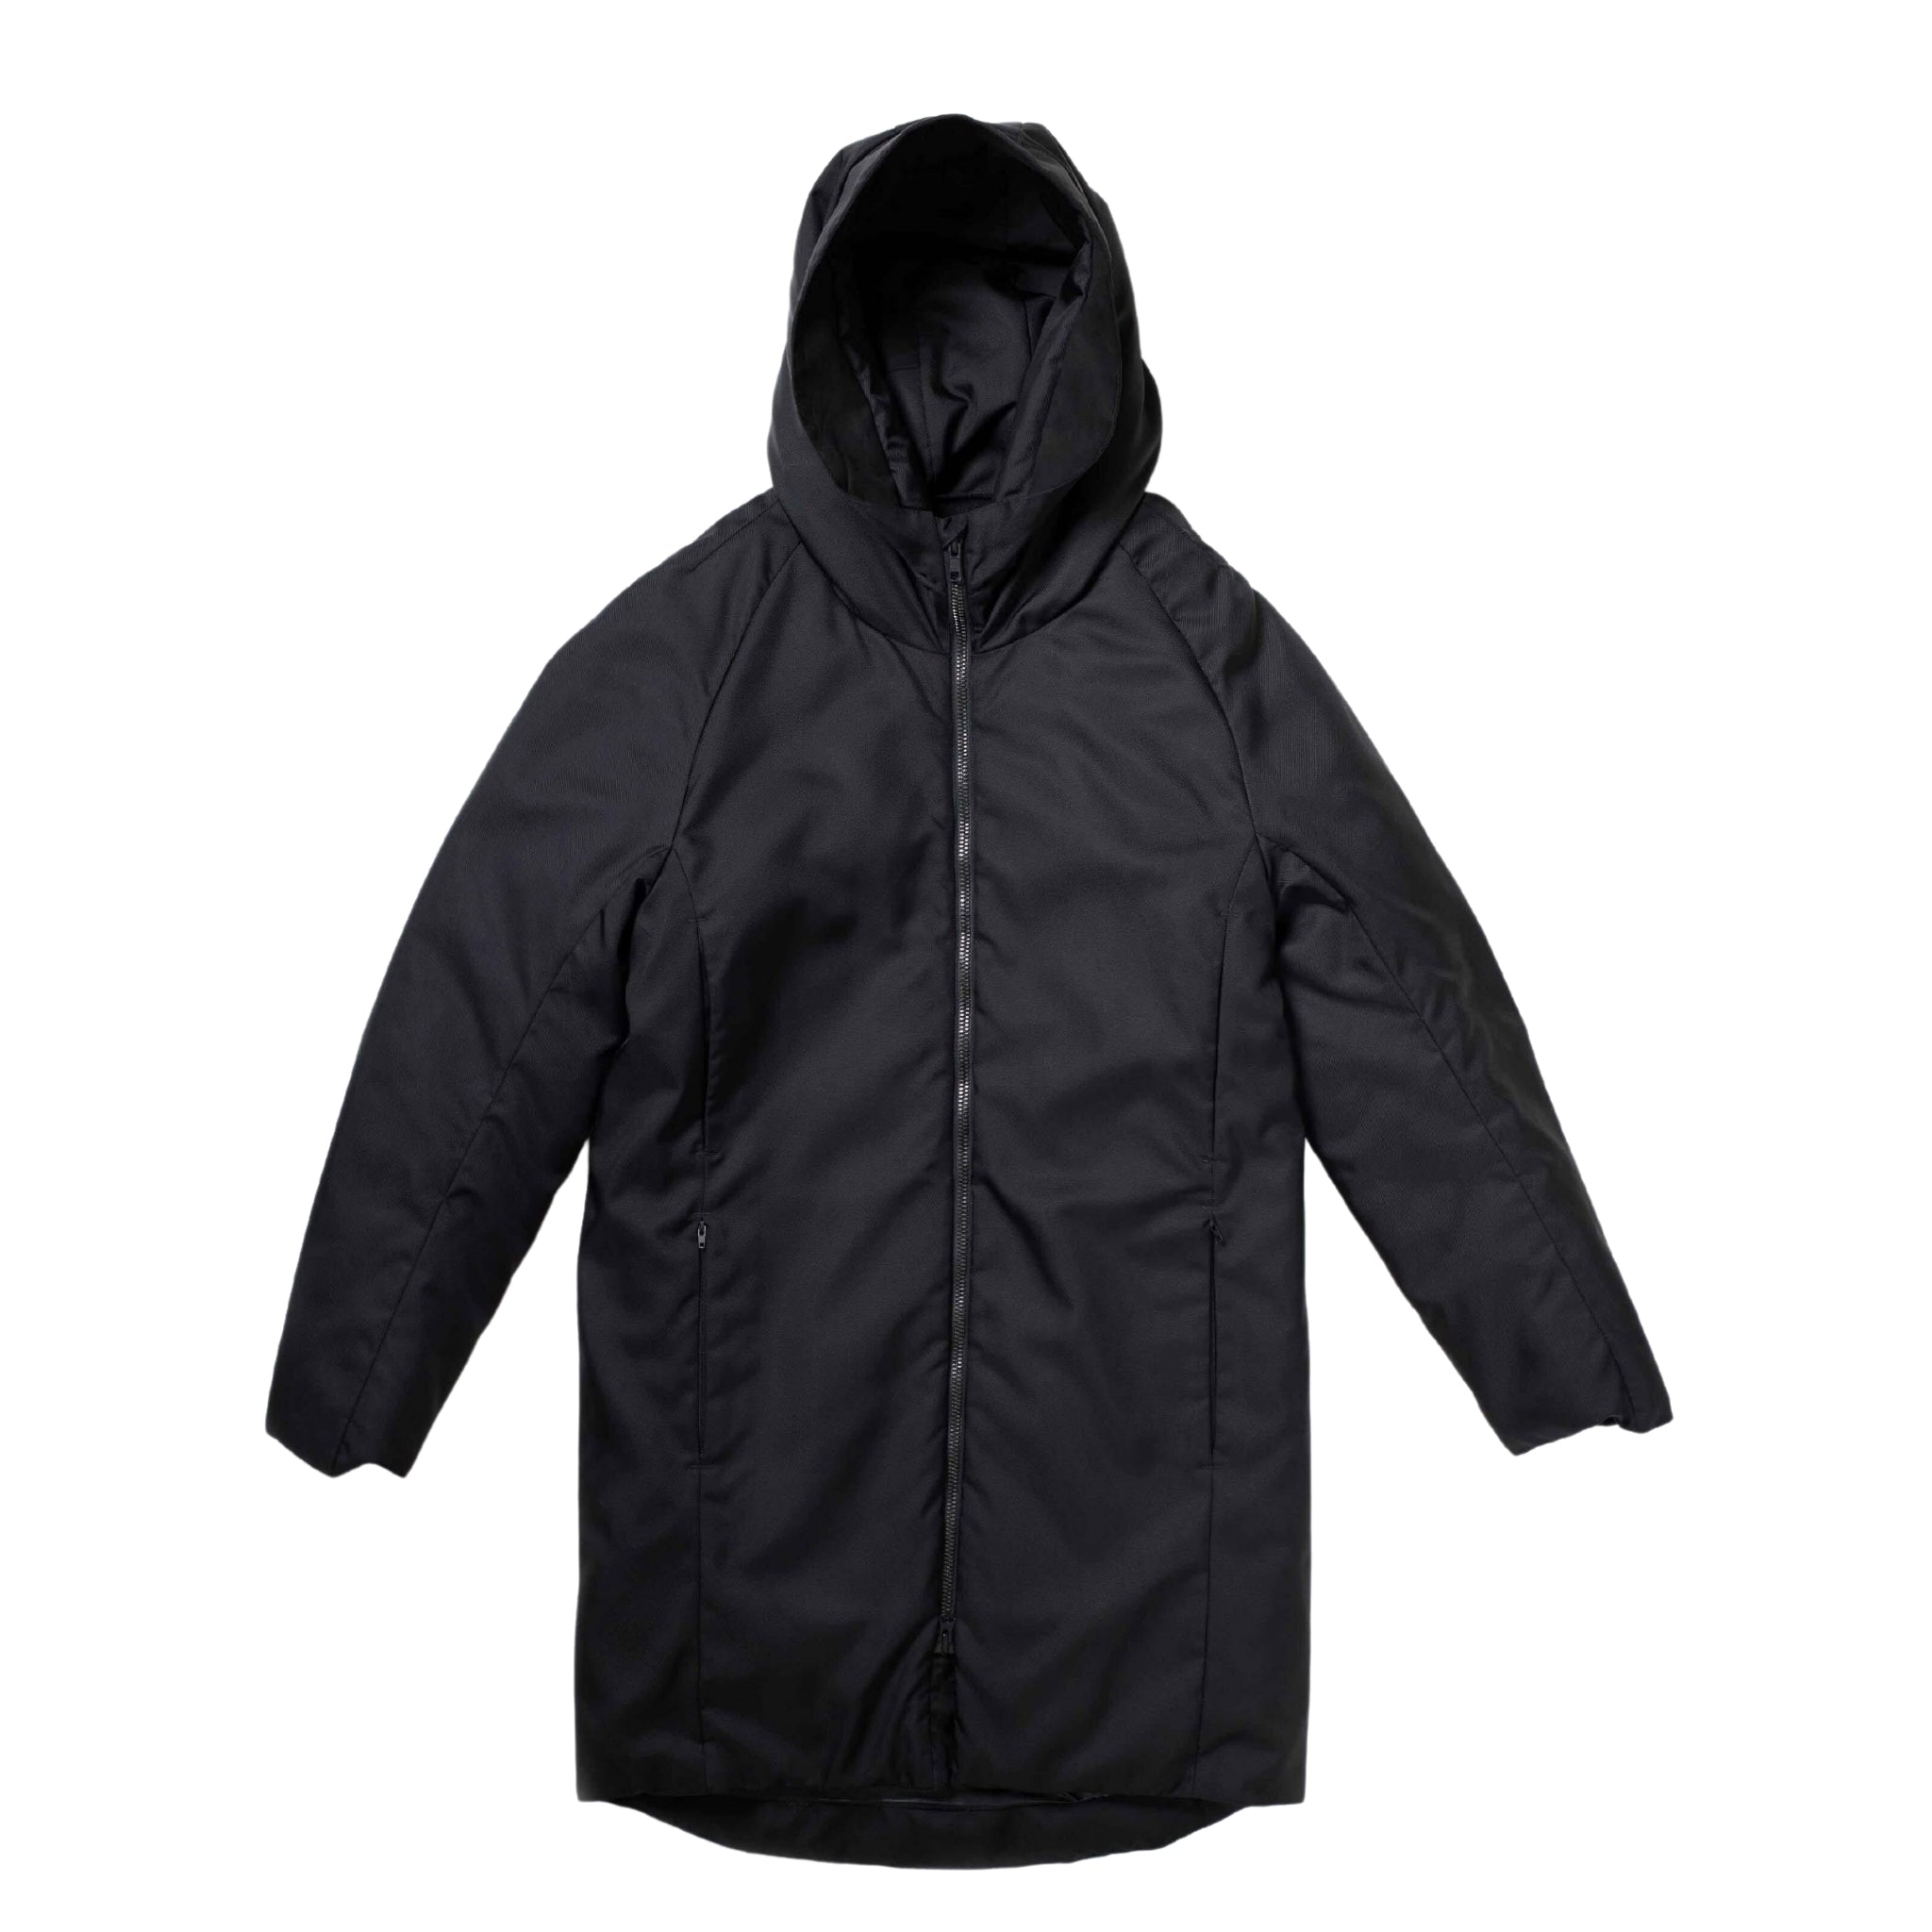 Front view of black 3/4 parka against white background